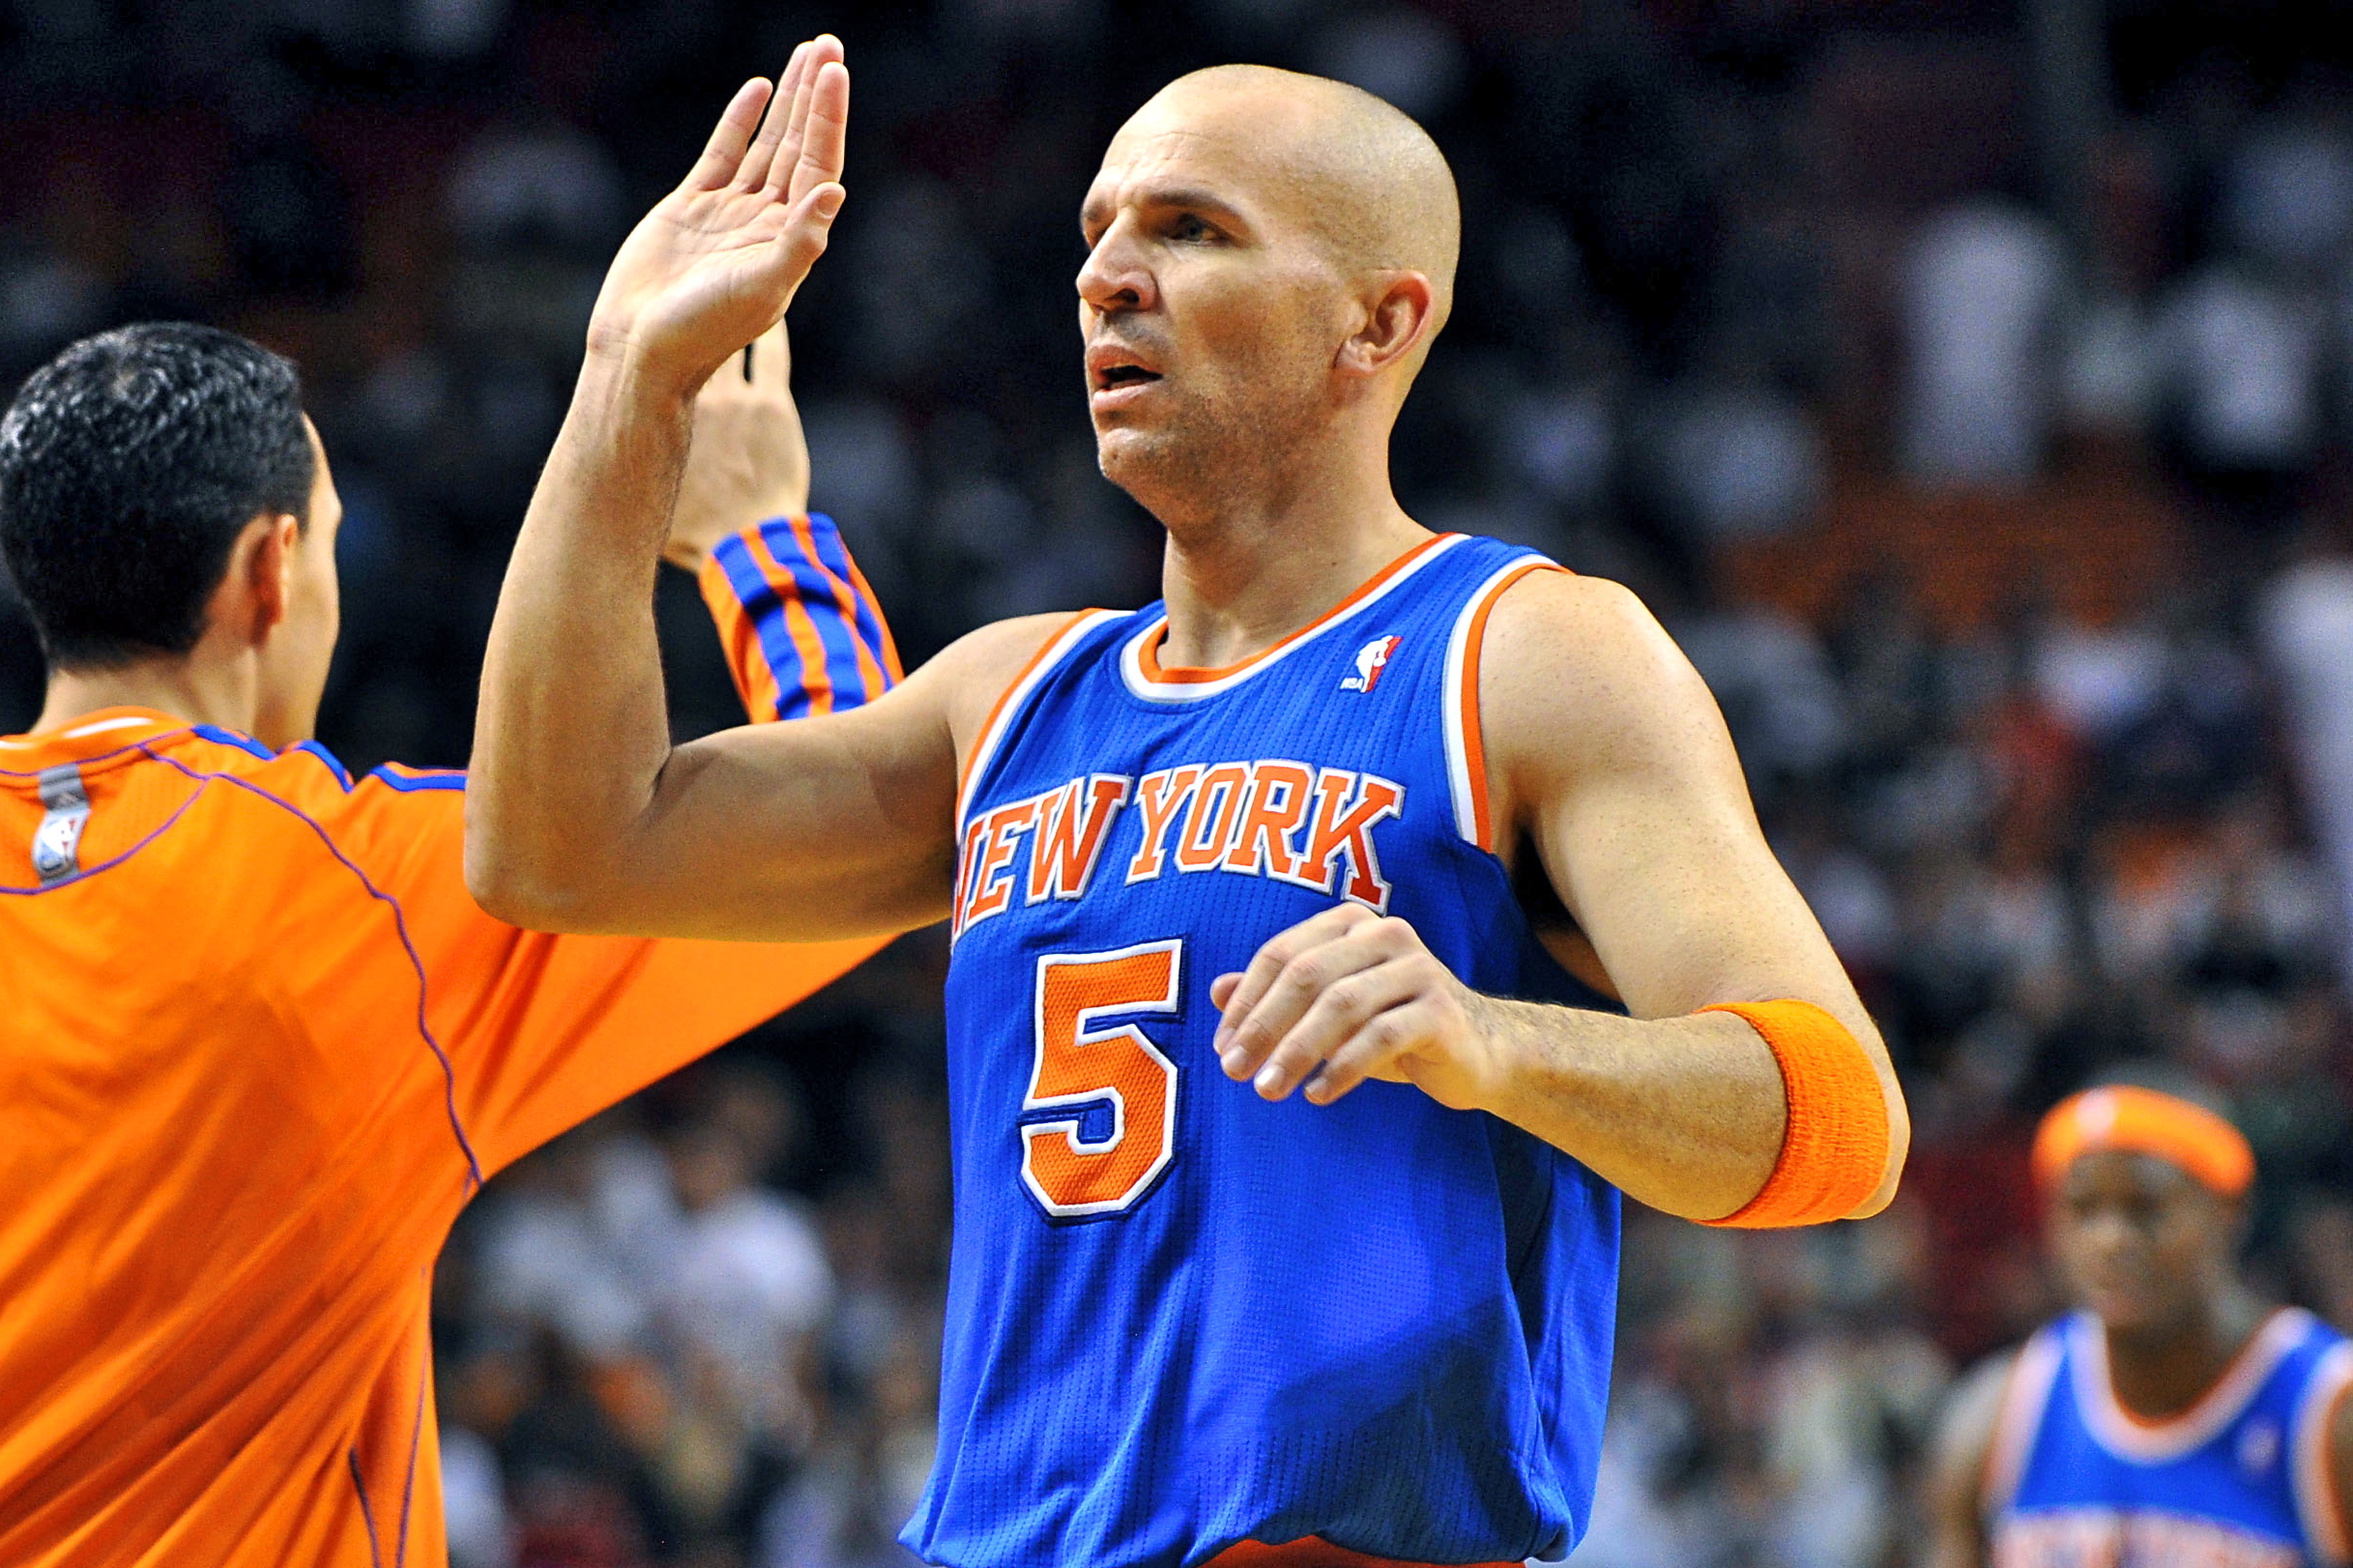 Brooklyn Nets - Congratulations to Jason Kidd on being named a